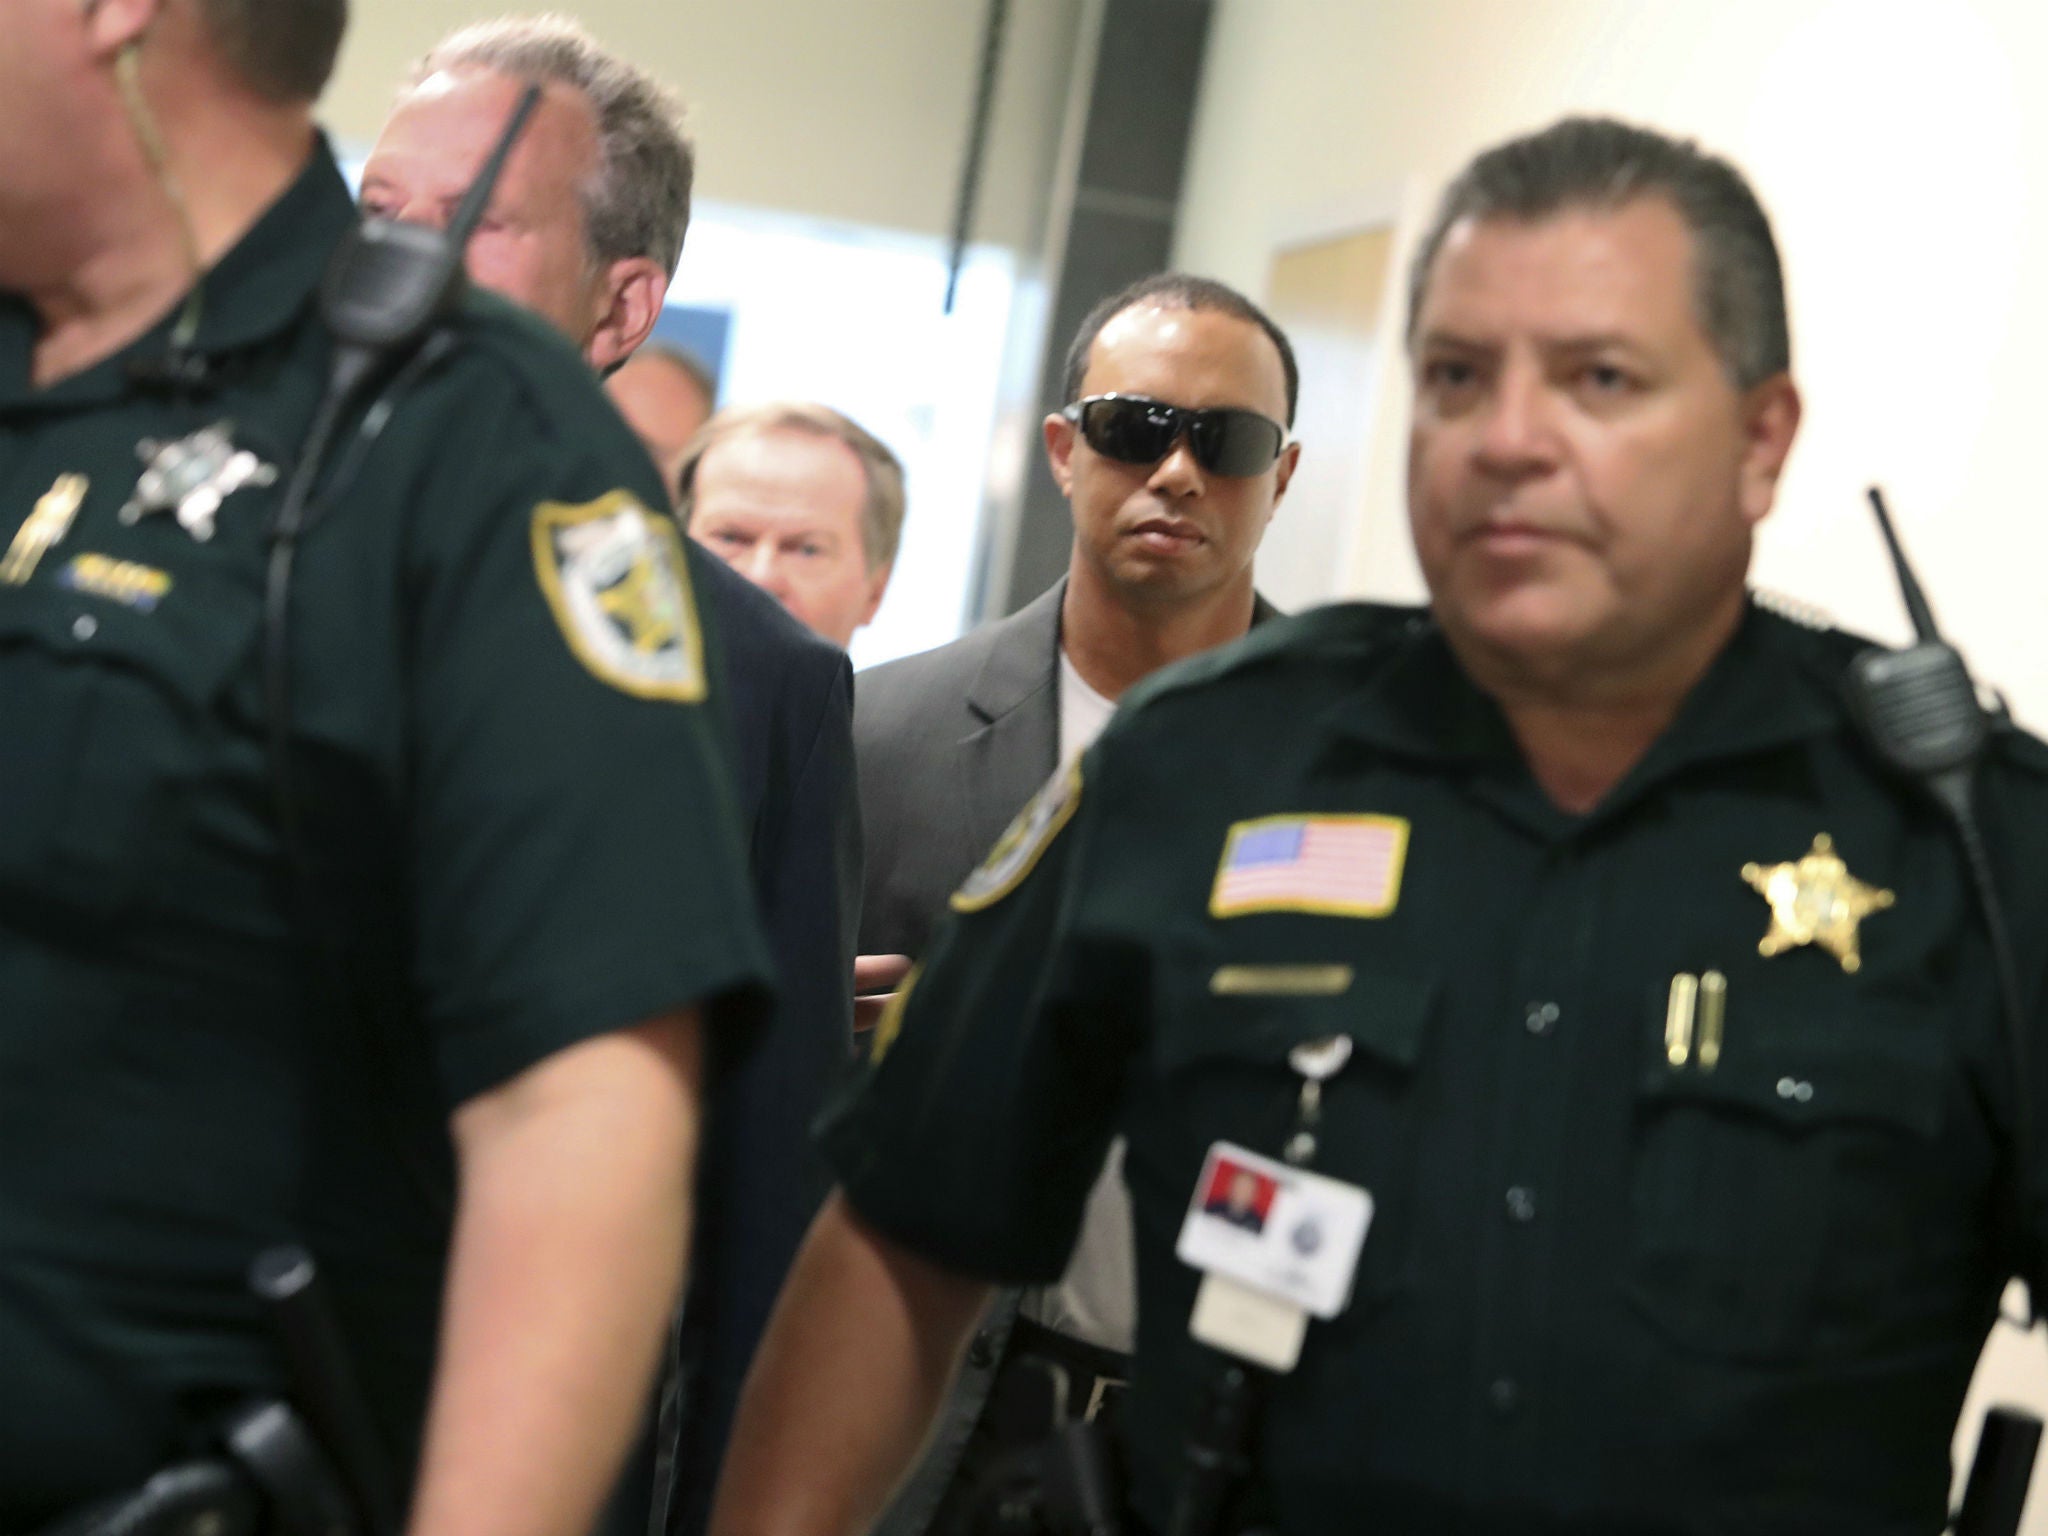 Tiger Woods, center, makes his way into a North County Courthouse courtroom in Palm Beach Gardens, Florida on Friday Oct. 27, 2017, to plead guilty to a second-degree misdemeanor reckless driving charge.